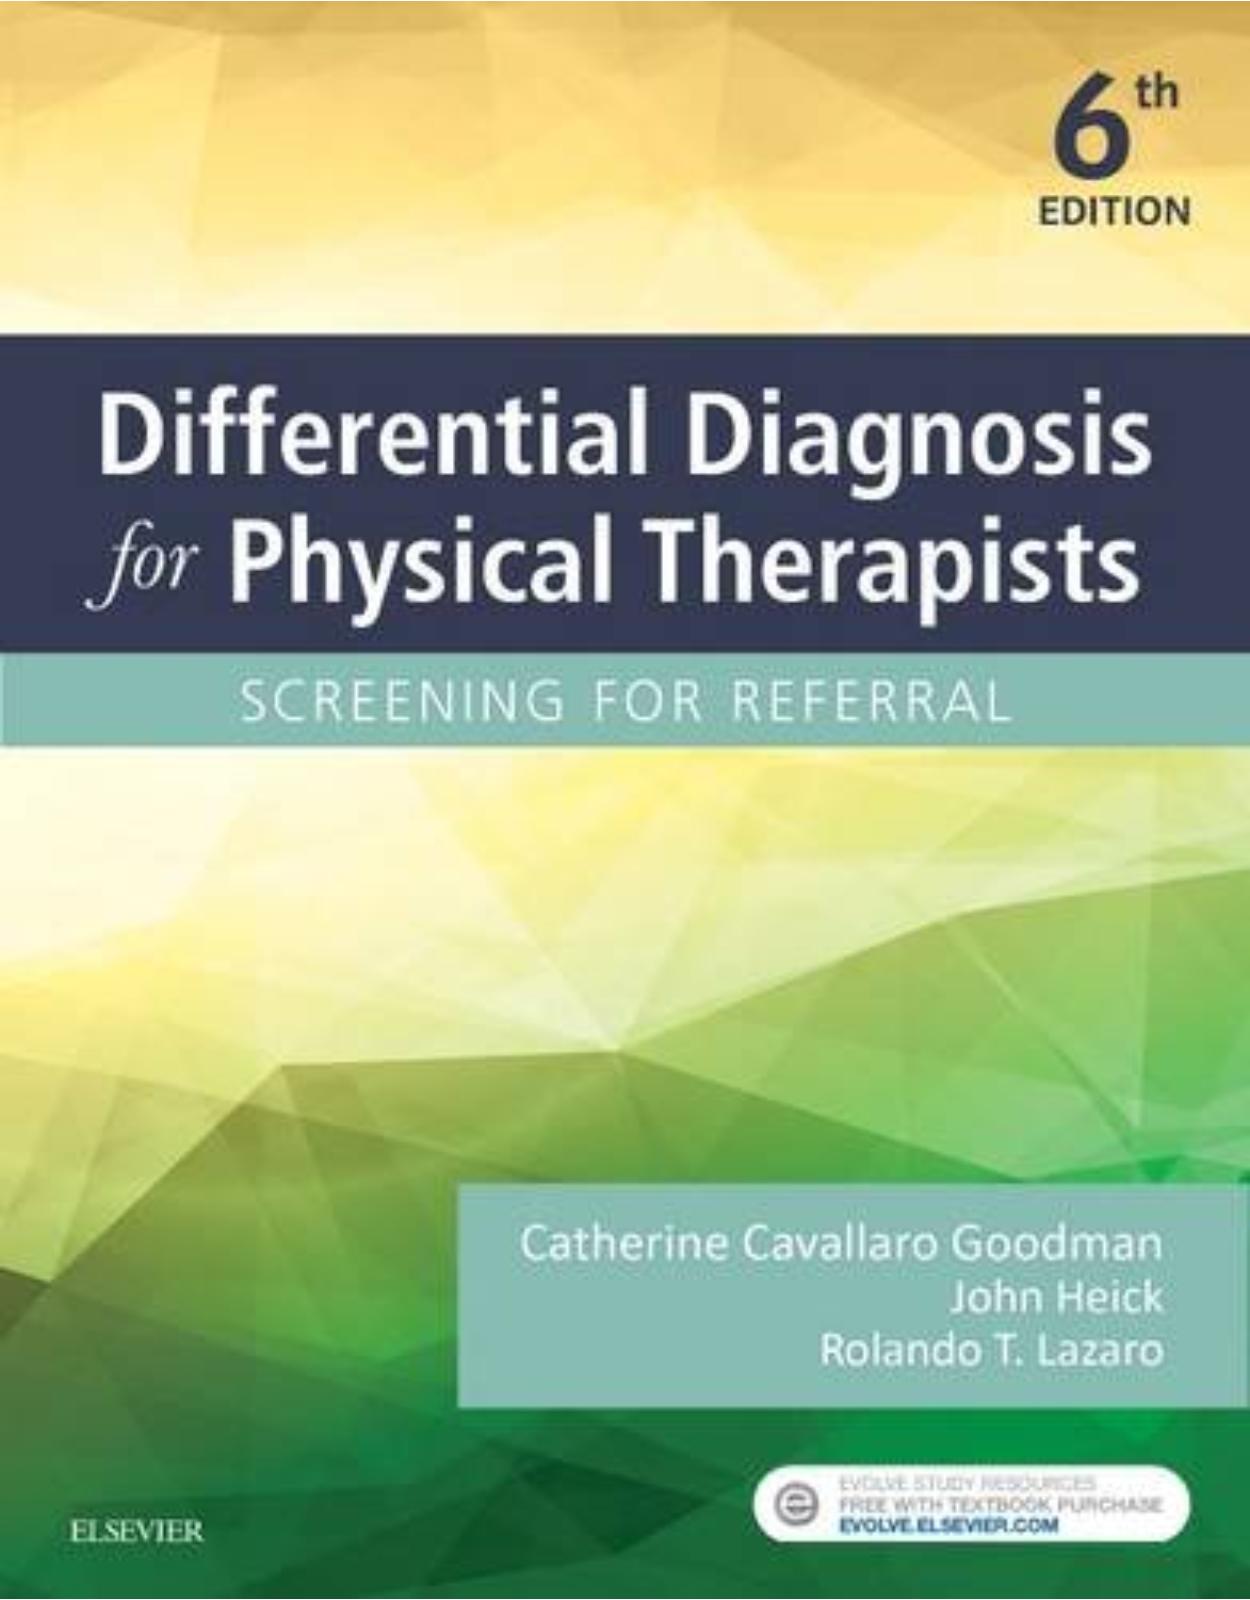 Differential Diagnosis for Physical Therapists: Screening for Referral, 6e